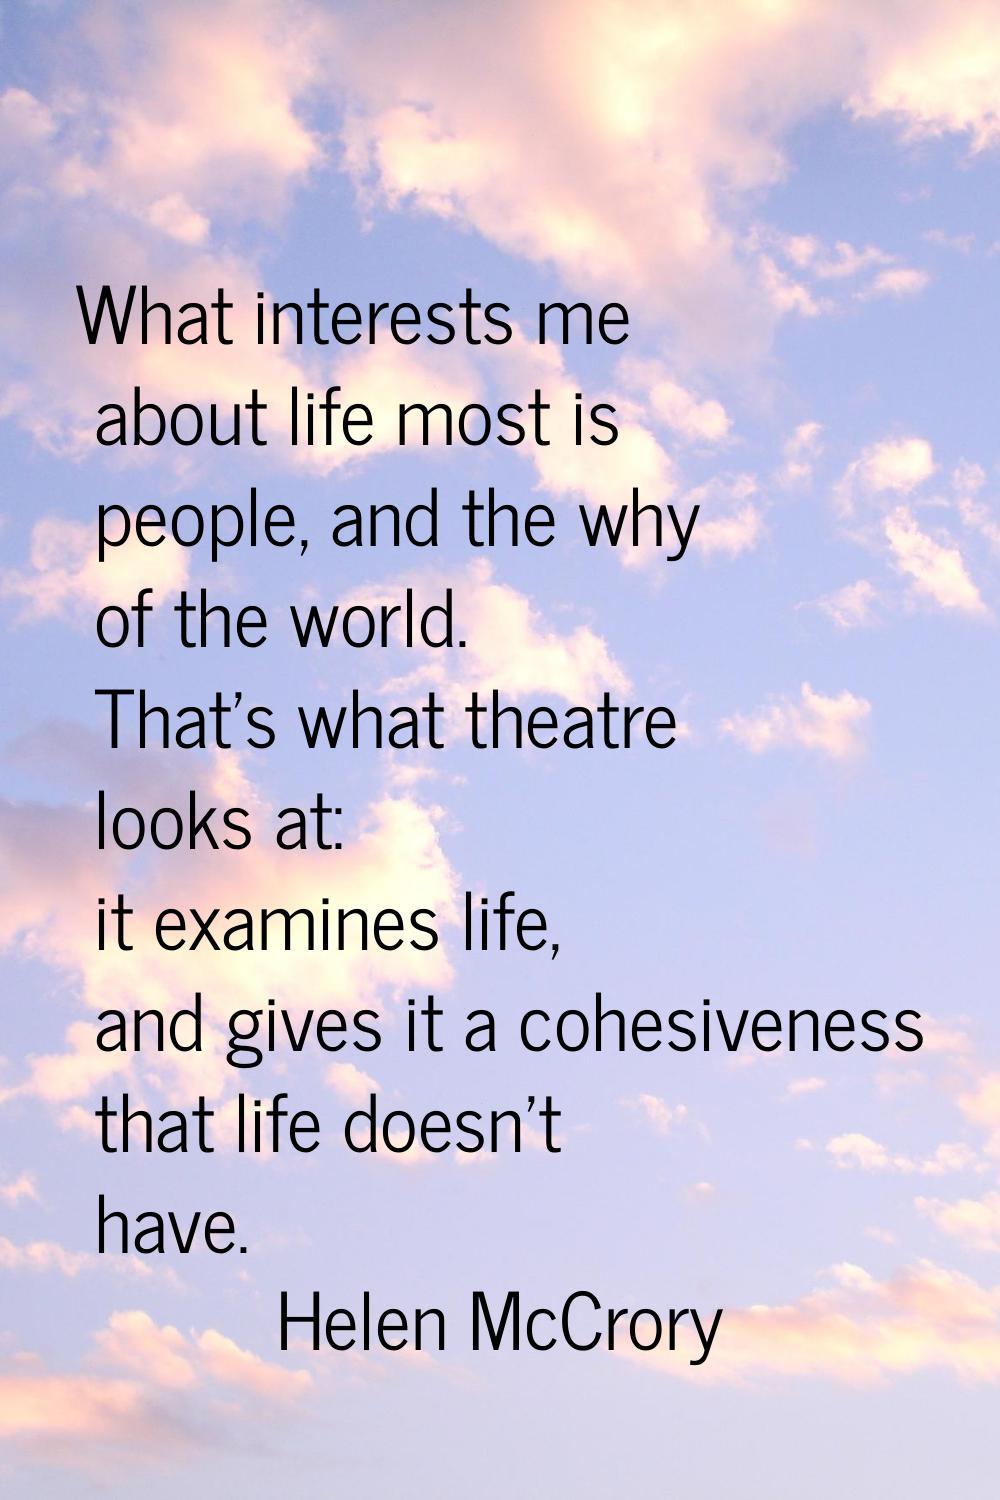 What interests me about life most is people, and the why of the world. That's what theatre looks at